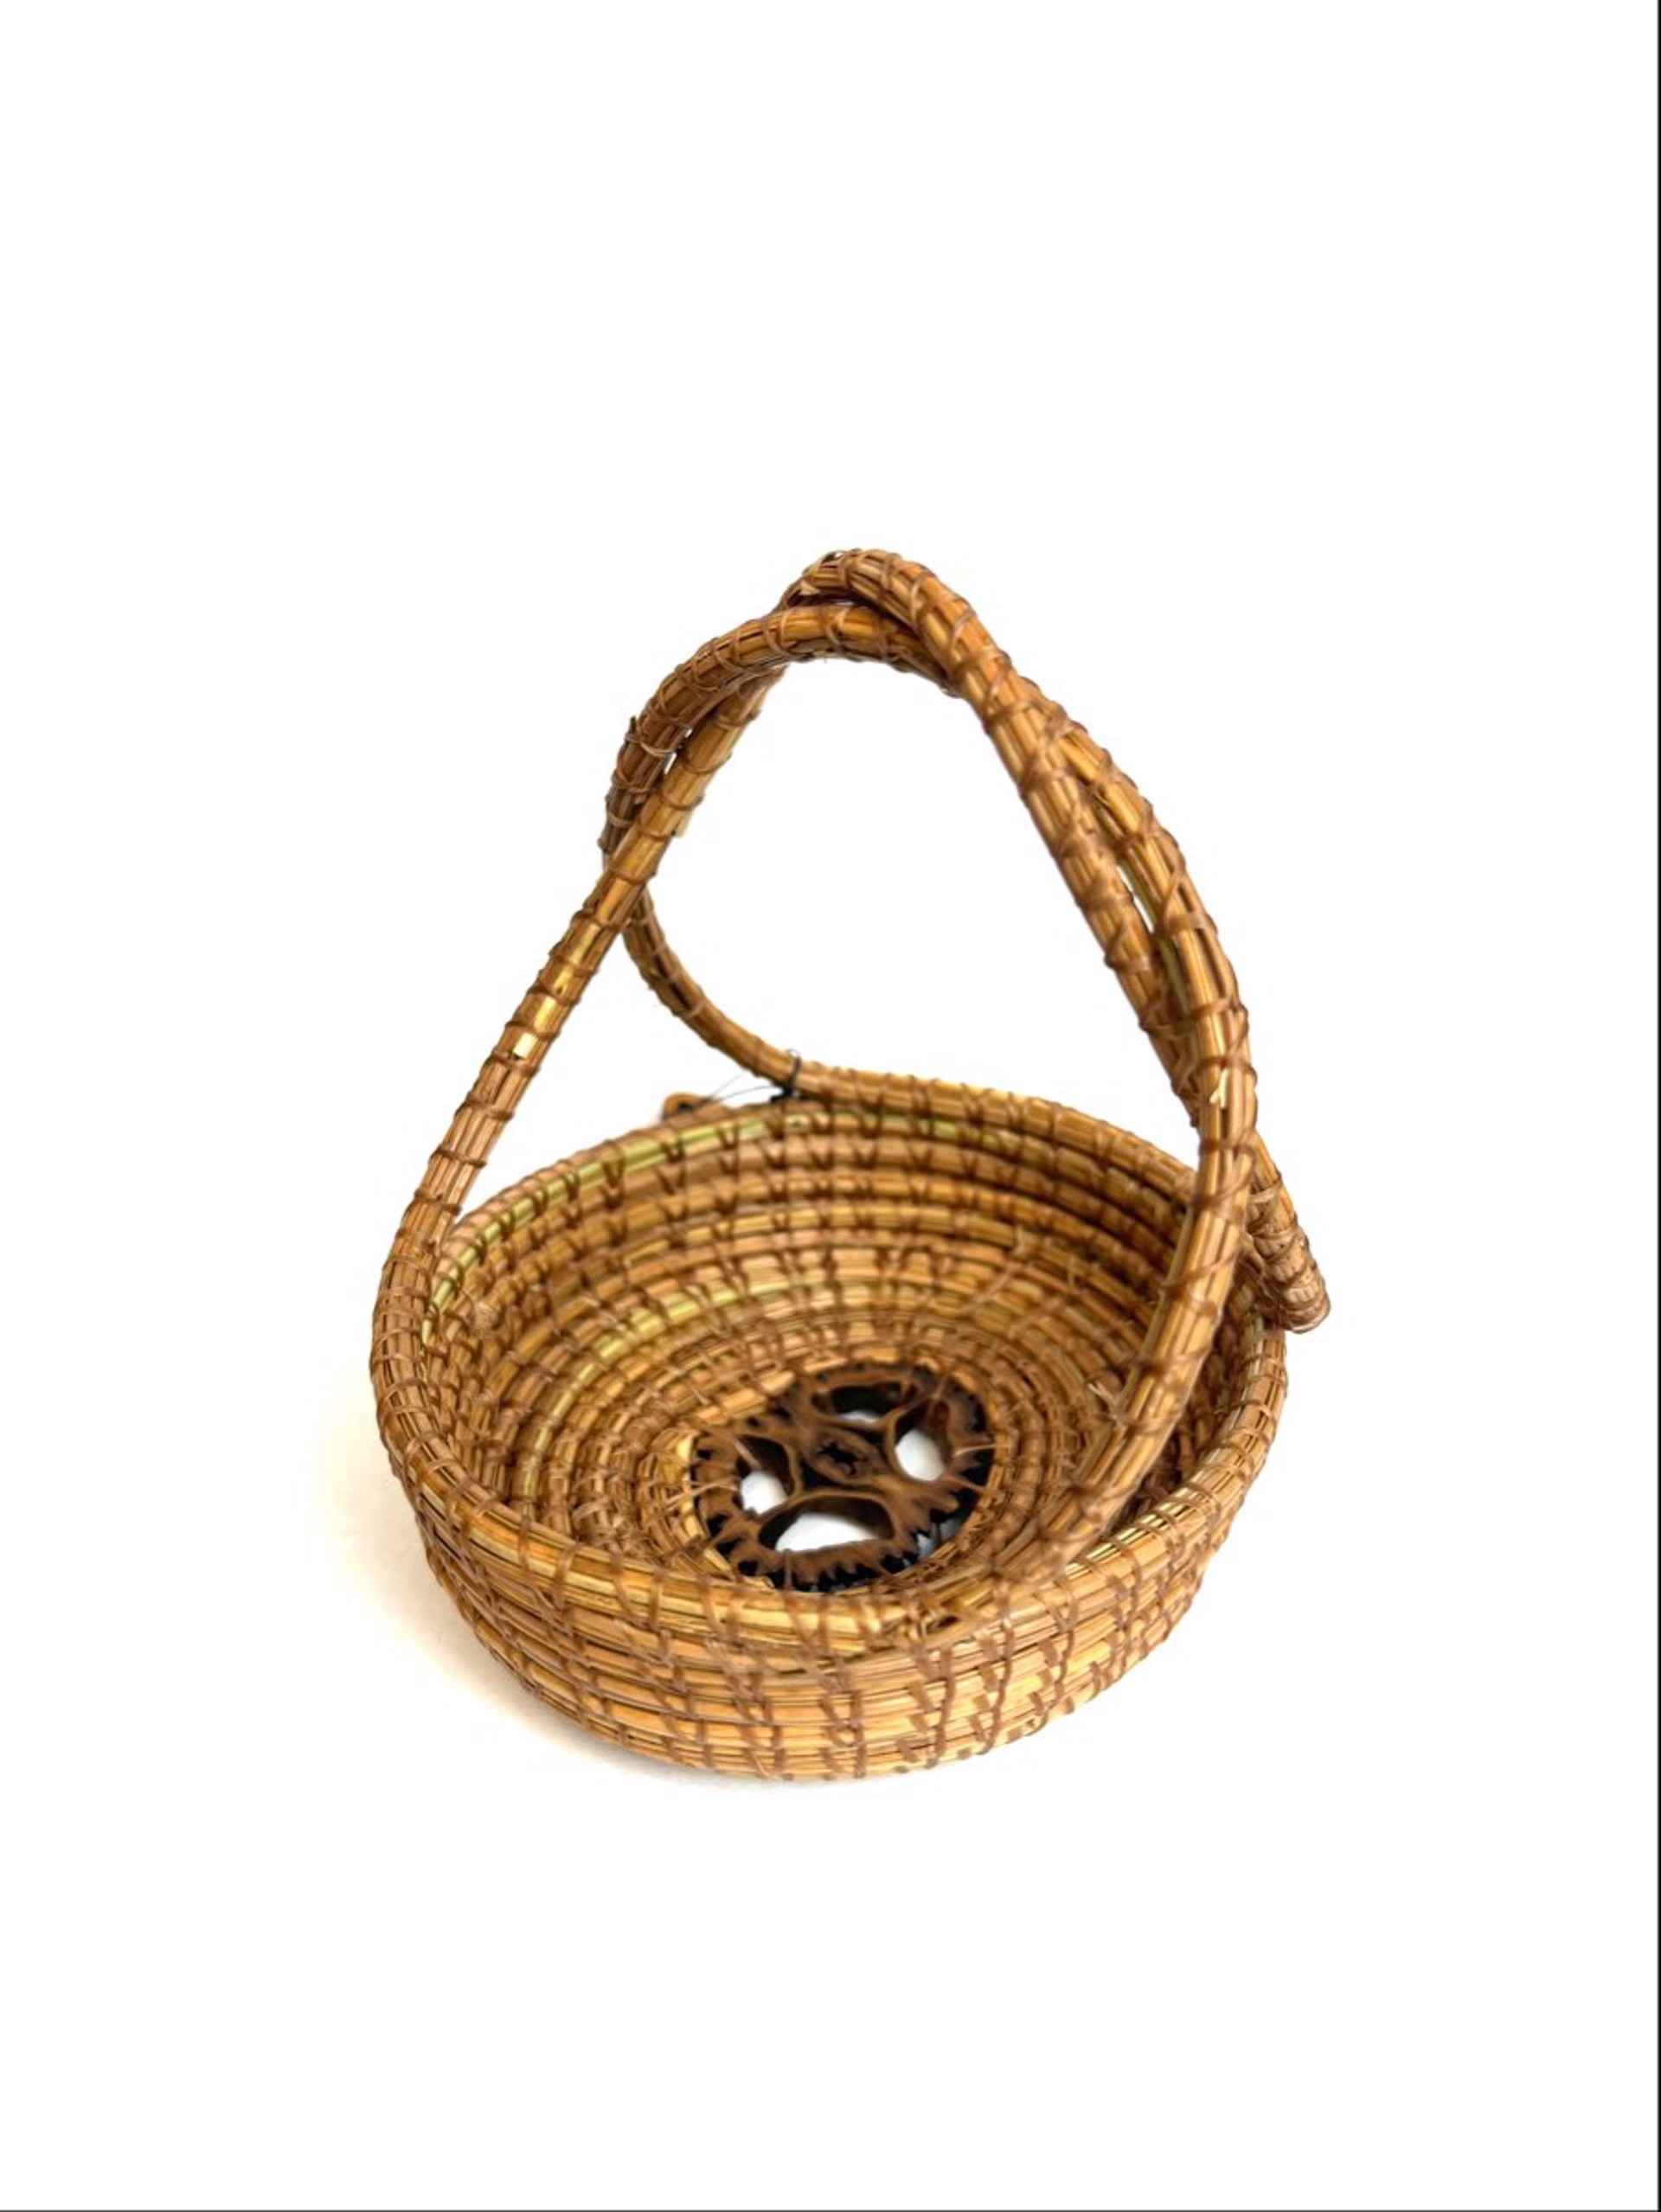 Basket with Walnut Center and Twisted Handle by Jacqueline Green